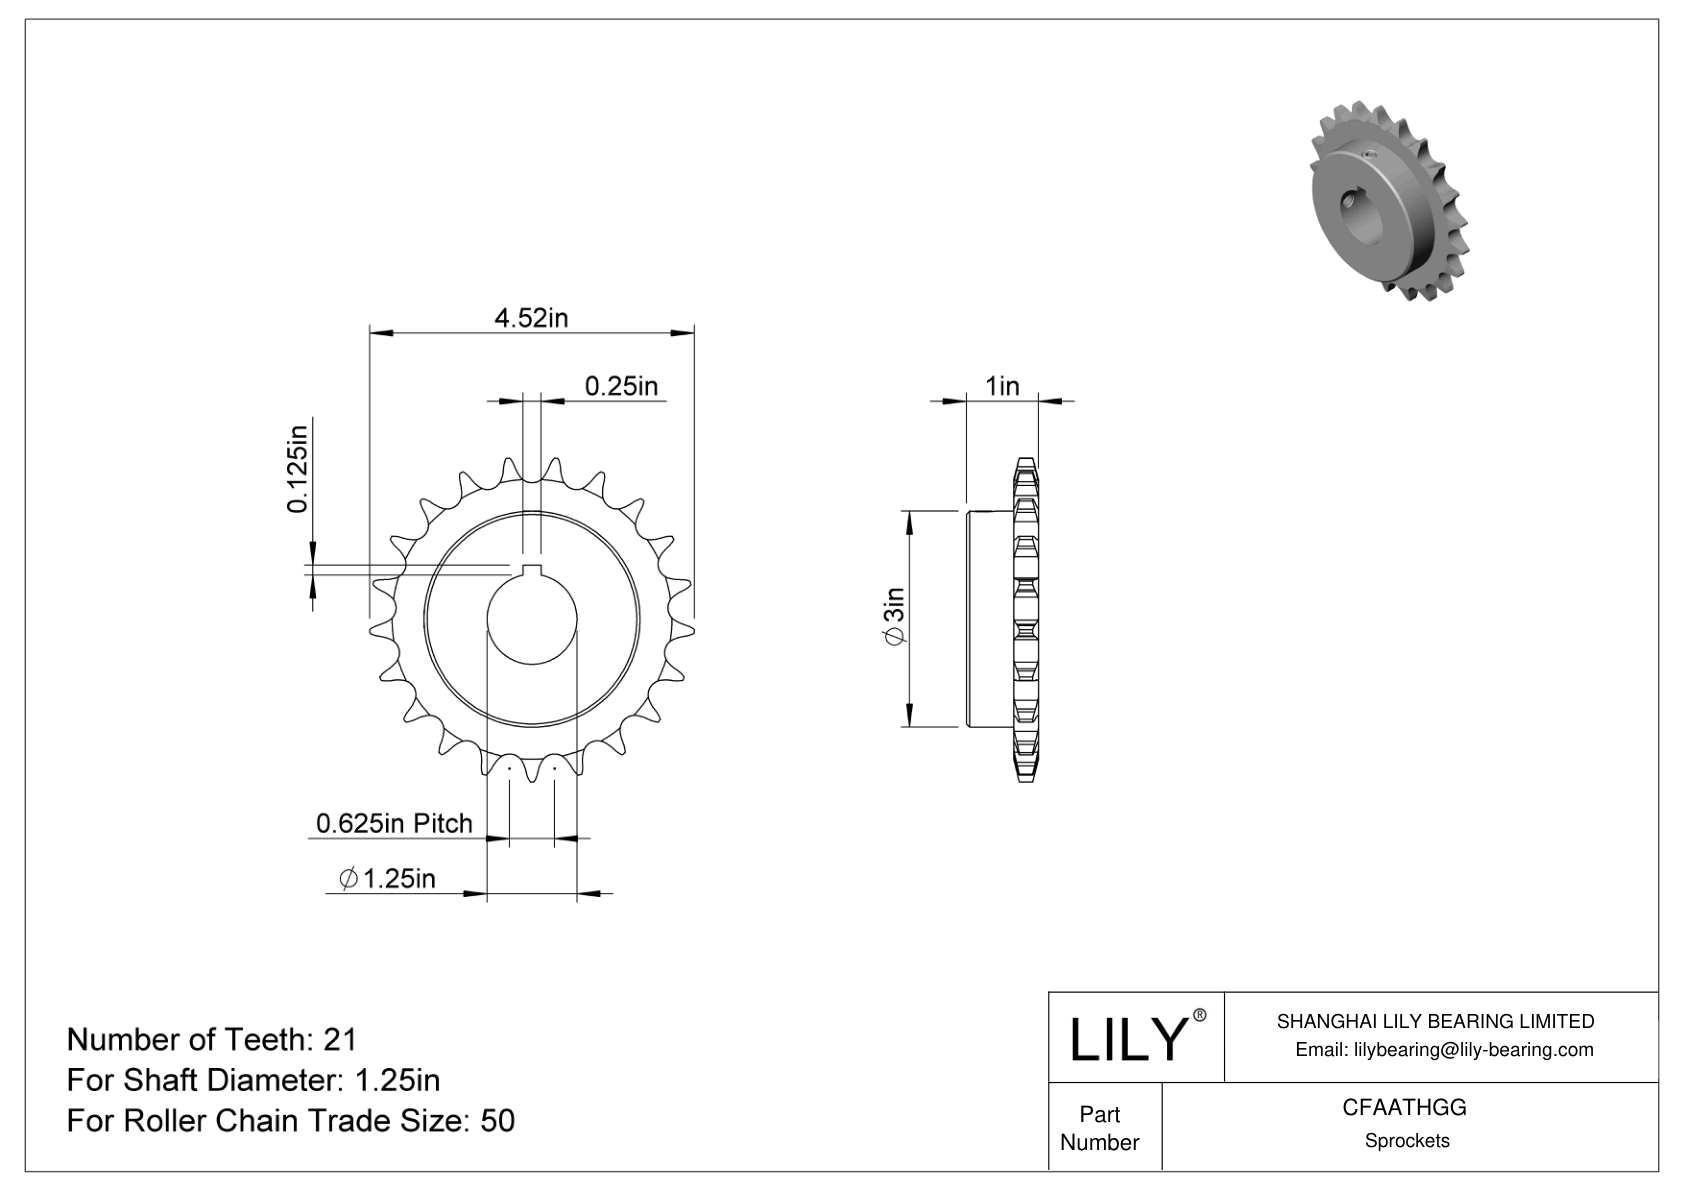 CFAATHGG Wear-Resistant Sprockets for ANSI Roller Chain cad drawing